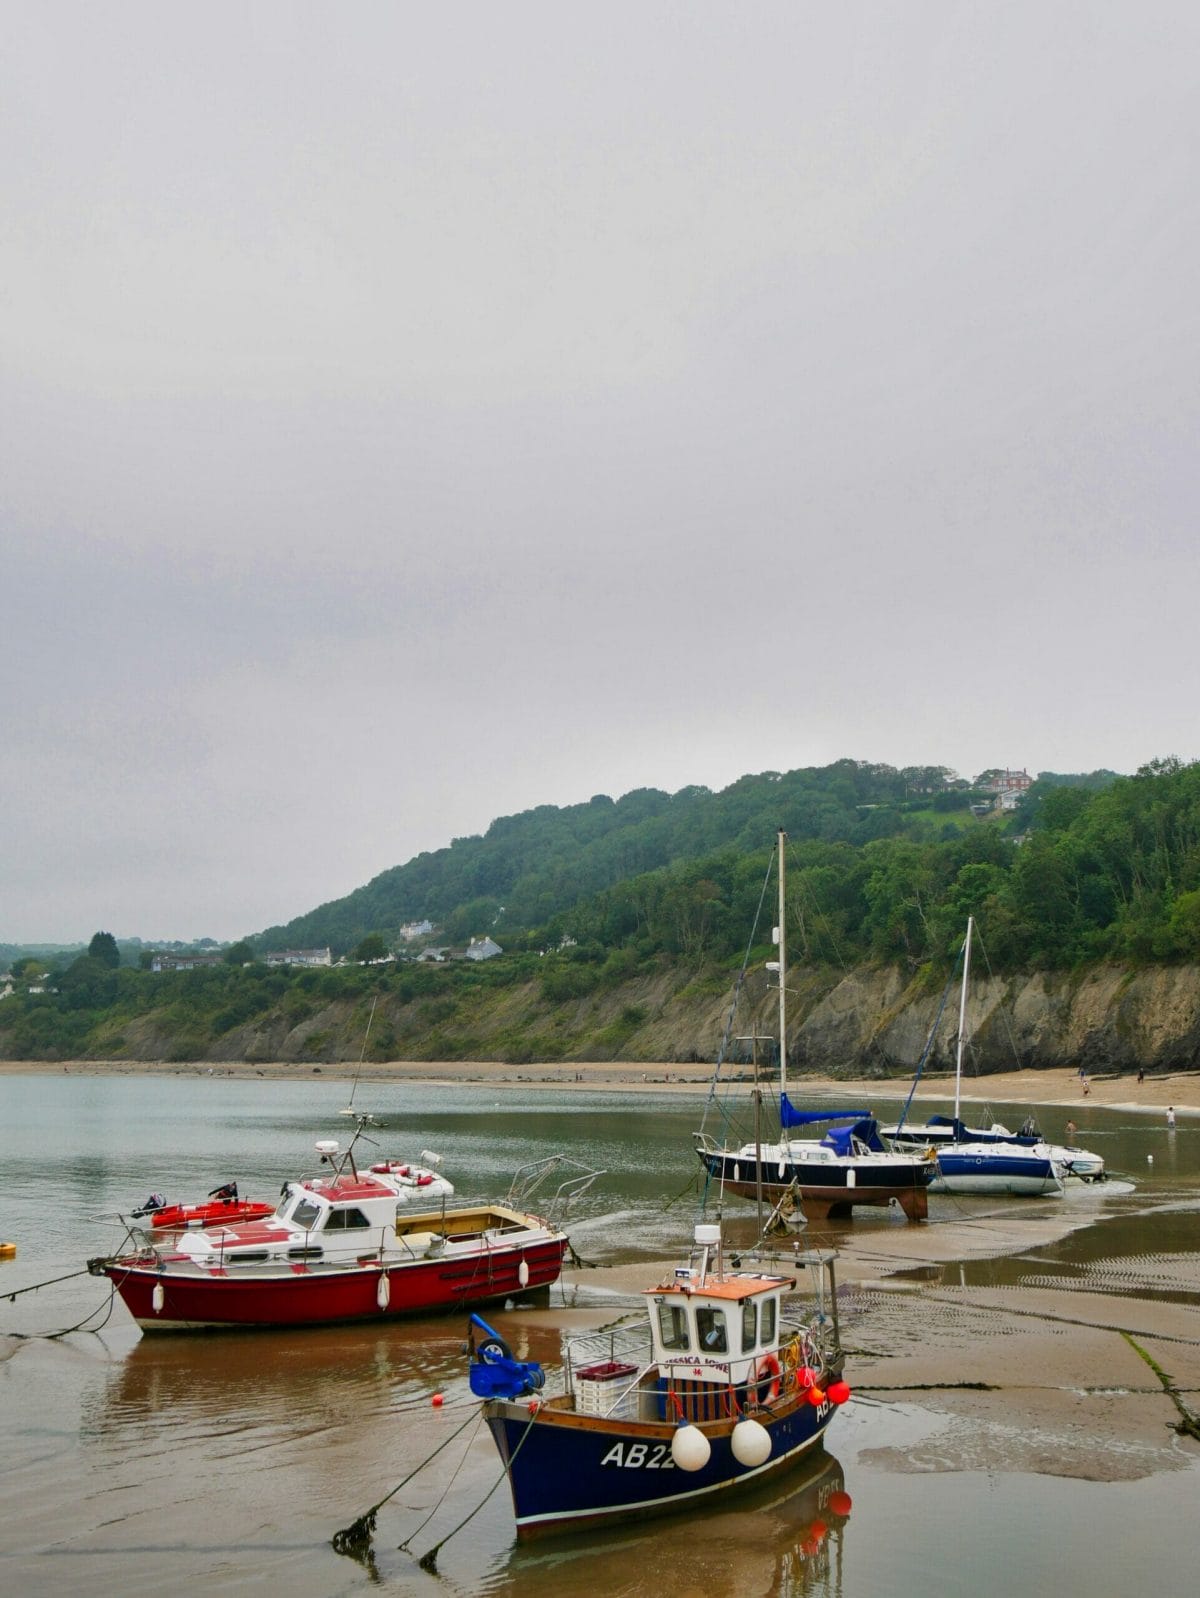 Some boats in the sandy water in New Quay in Wales